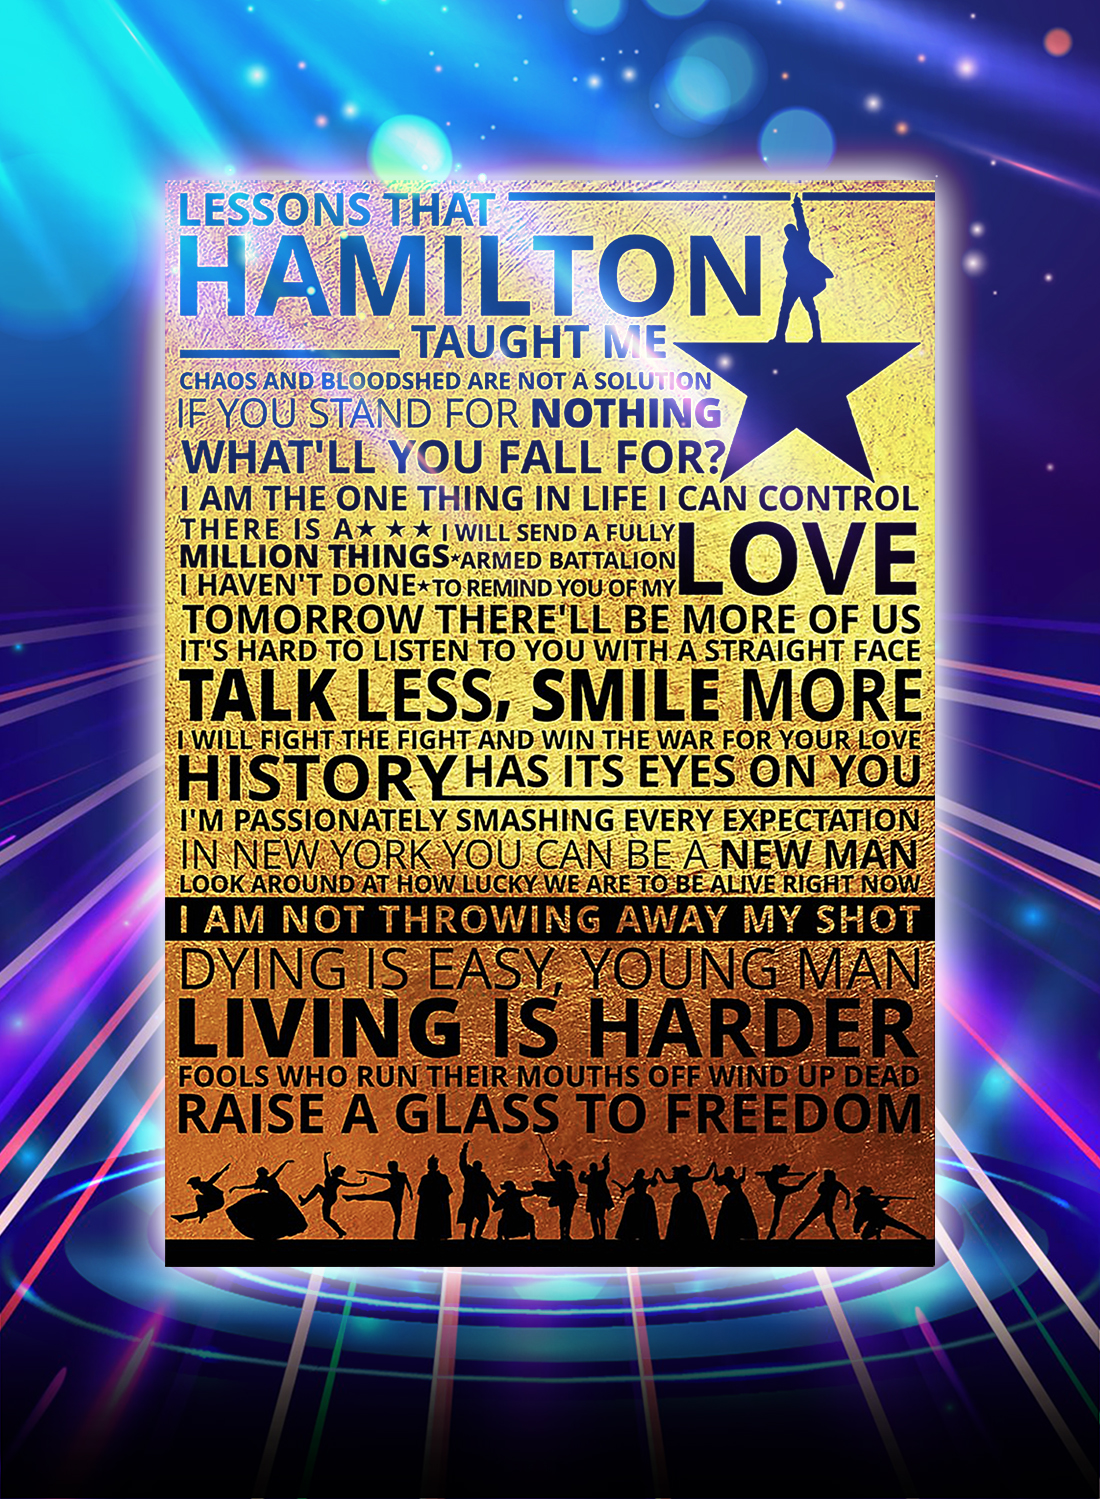 Lessons hamilton taught me poster - A4